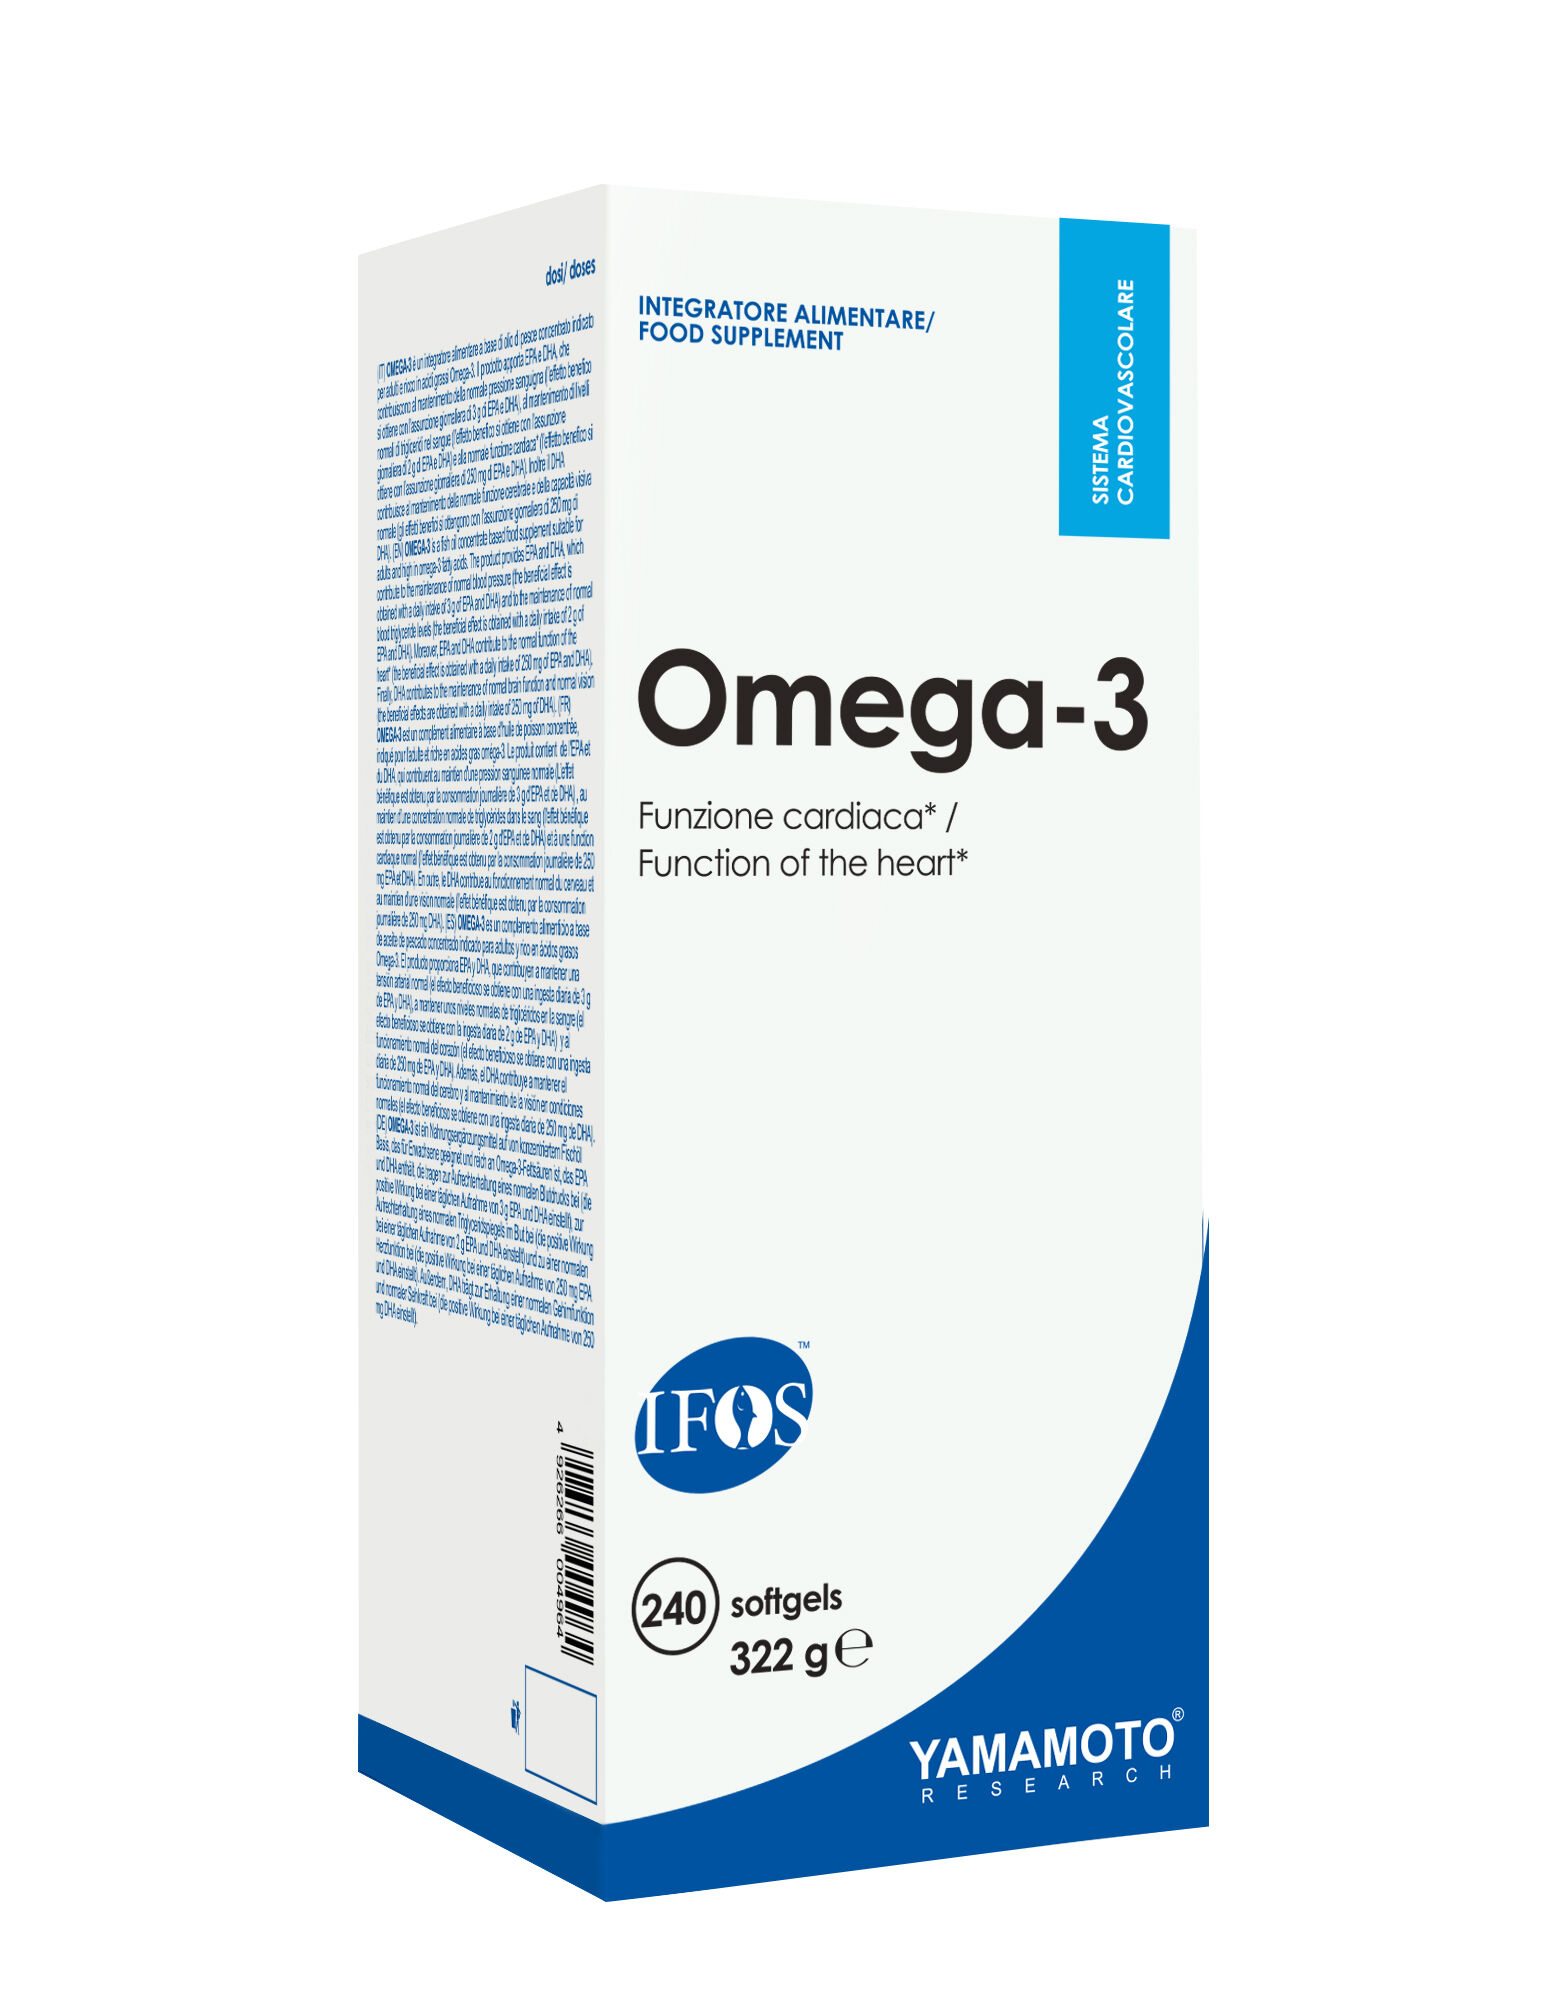 yamamoto research omega-3 ifos™ 240 softgels